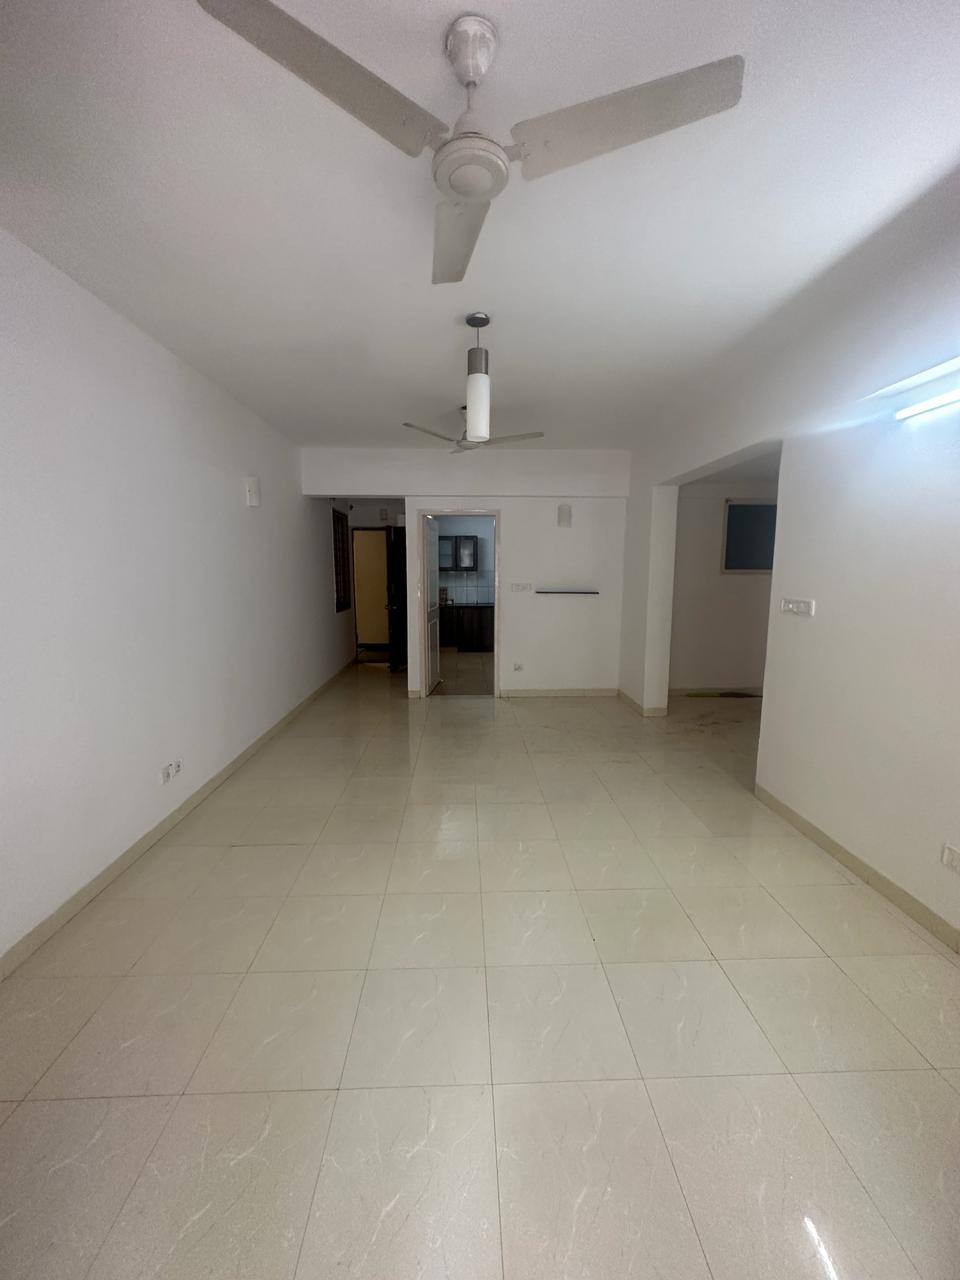 2 BHK Residential Apartment for Lease Only at JAML2 - 2687 in Cubbonpet